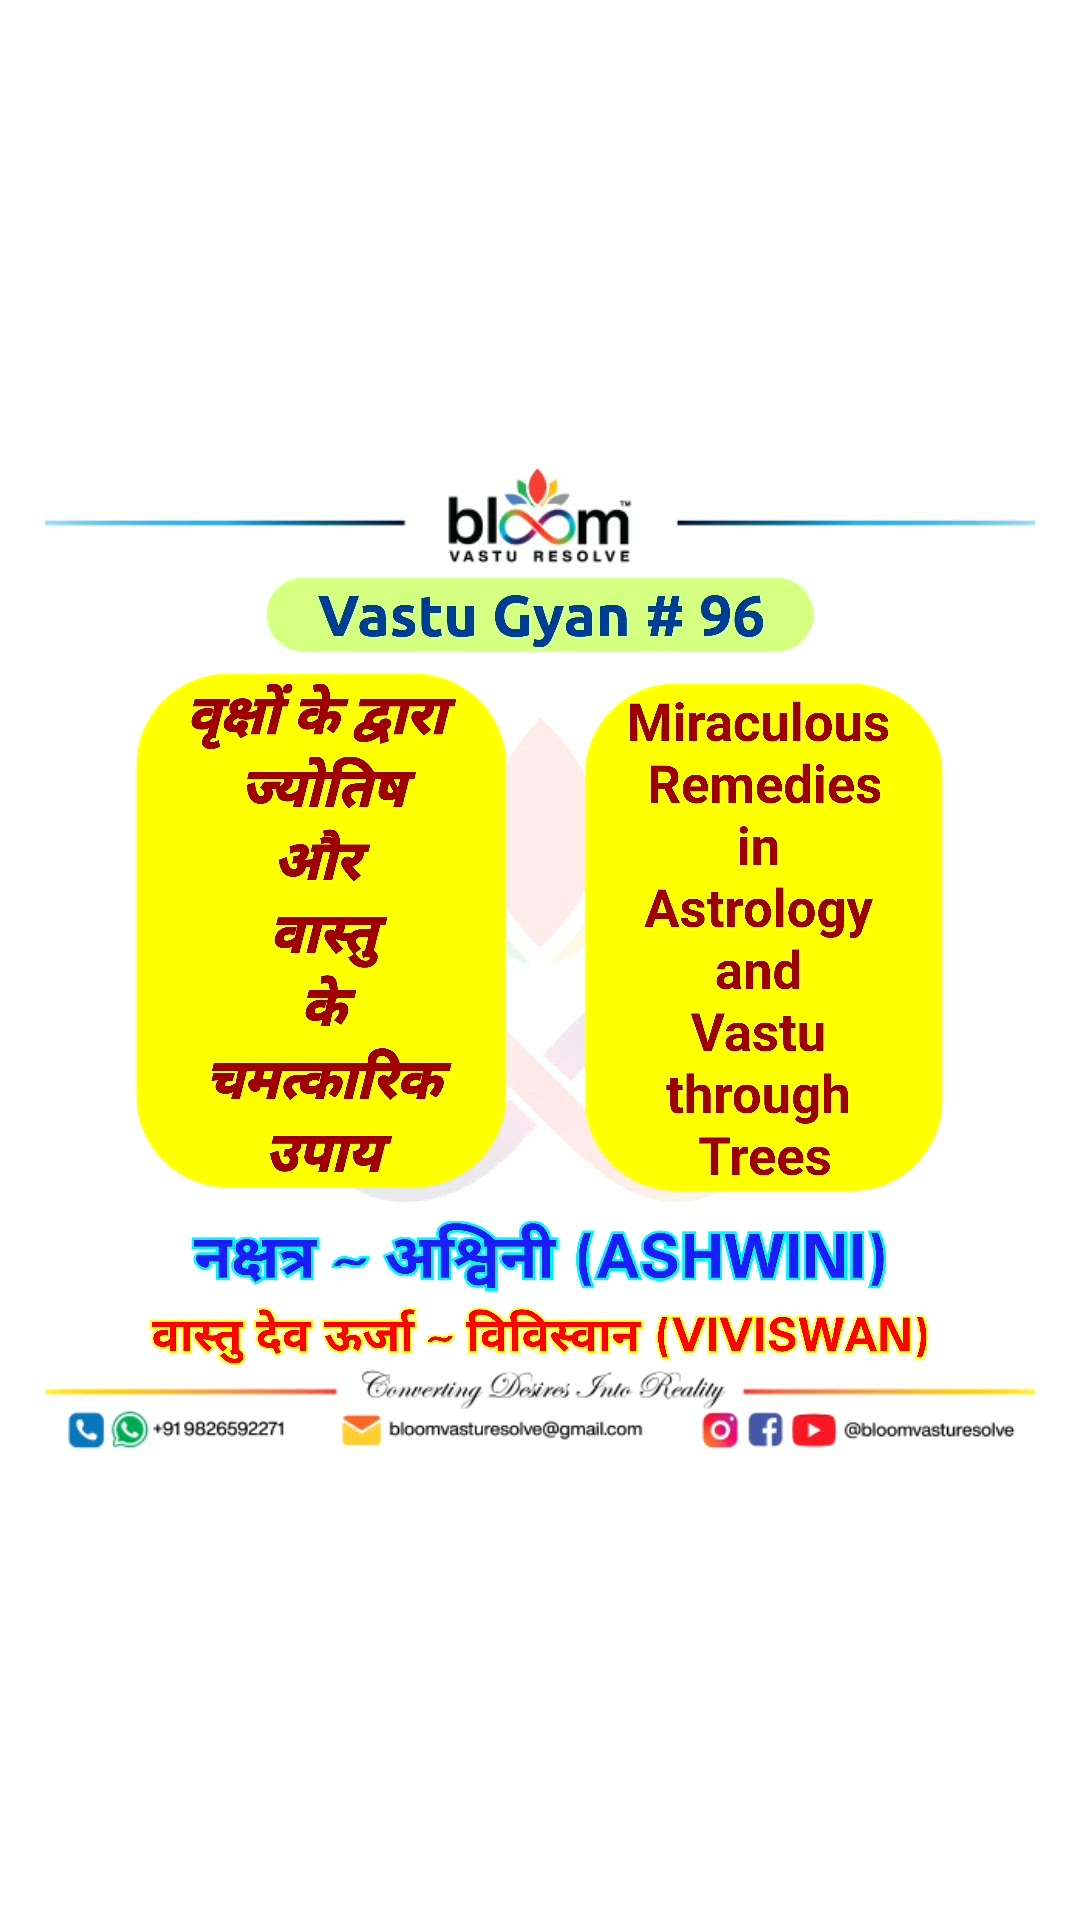 Which Nakshatra tree do you want to know, kindly write in the comment box.

For more Vastu please follow @bloomvasturesolve
on YouTube, Instagram & Facebook
.
.
For personal consultation, feel free to contact certified MahaVastu Expert through
M - 9826592271
Or
bloomvasturesolve@gmail.com

#vastu 
#mahavastu 
#mahavastuexpert
#bloomvasturesolve
#BirthConstellationTree
#vasturemedies
#astrovastu
#astrology
#DivineEnergyRemedy
#Sacredtree
#ashwini
#kuchila